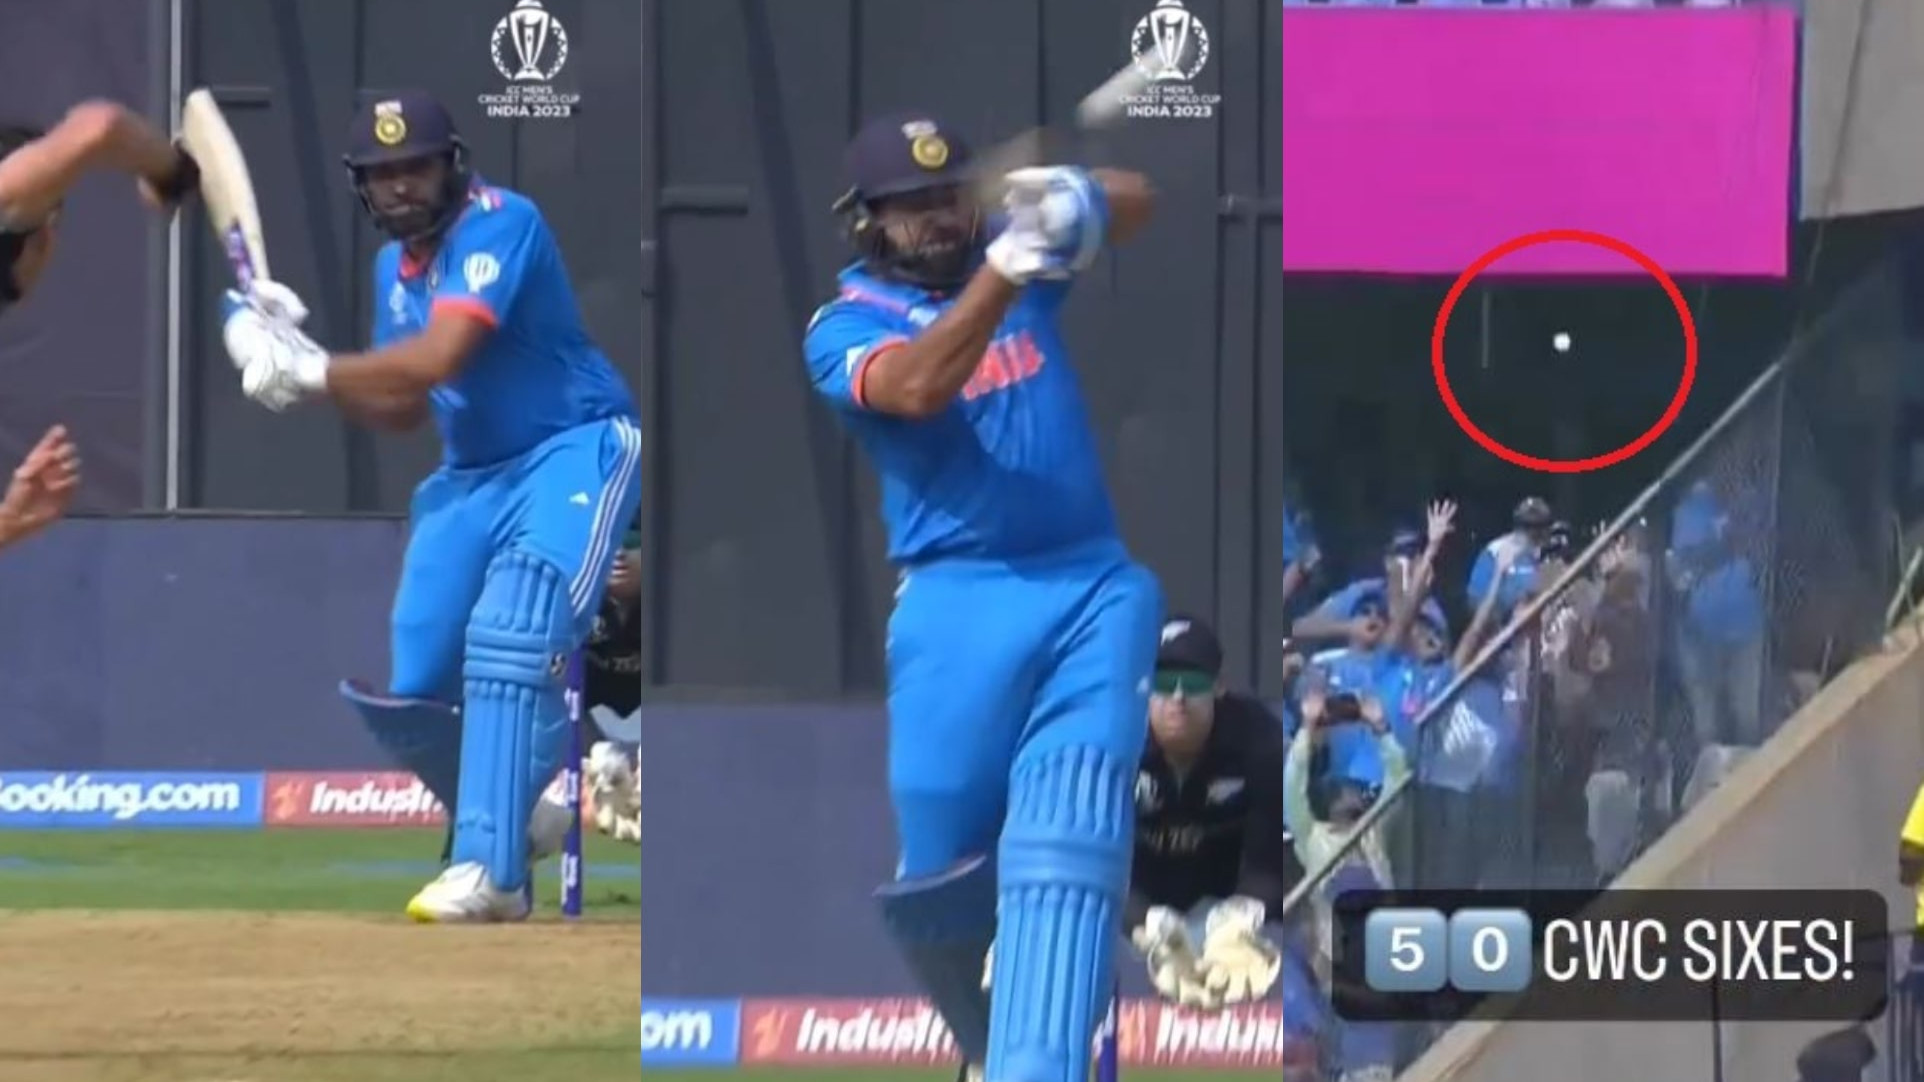 CWC 2023: WATCH- Rohit Sharma becomes first to hit 50 plus sixes in Cricket World Cup; beats Chris Gayle’s record